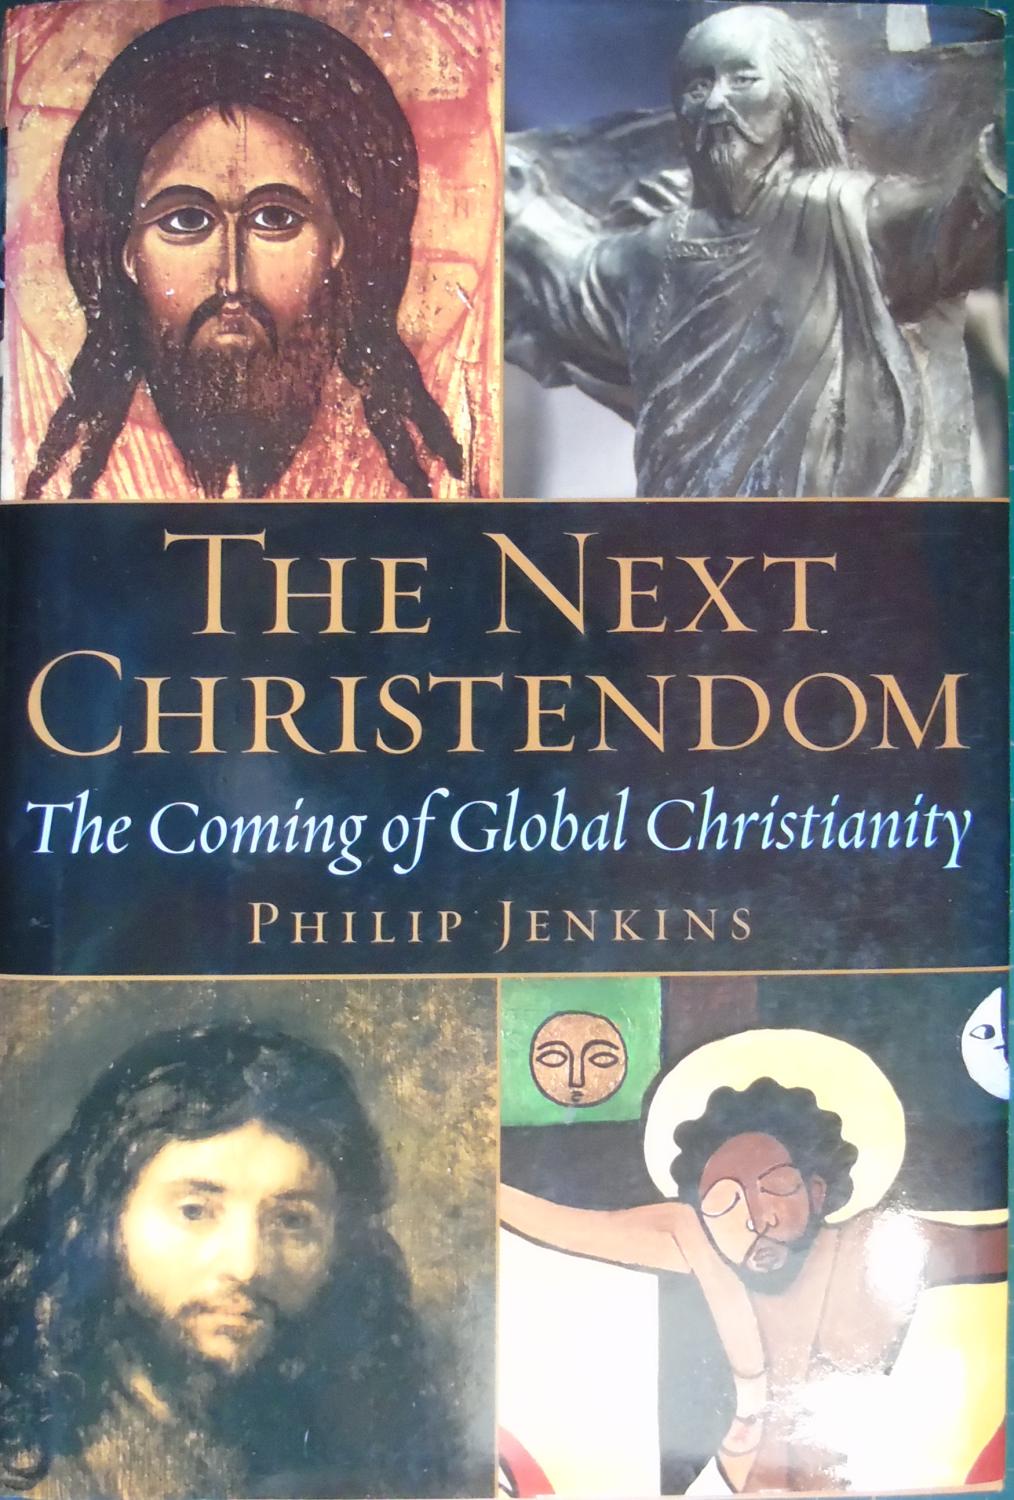 The Next Christendom. The Coming of Global Christianity